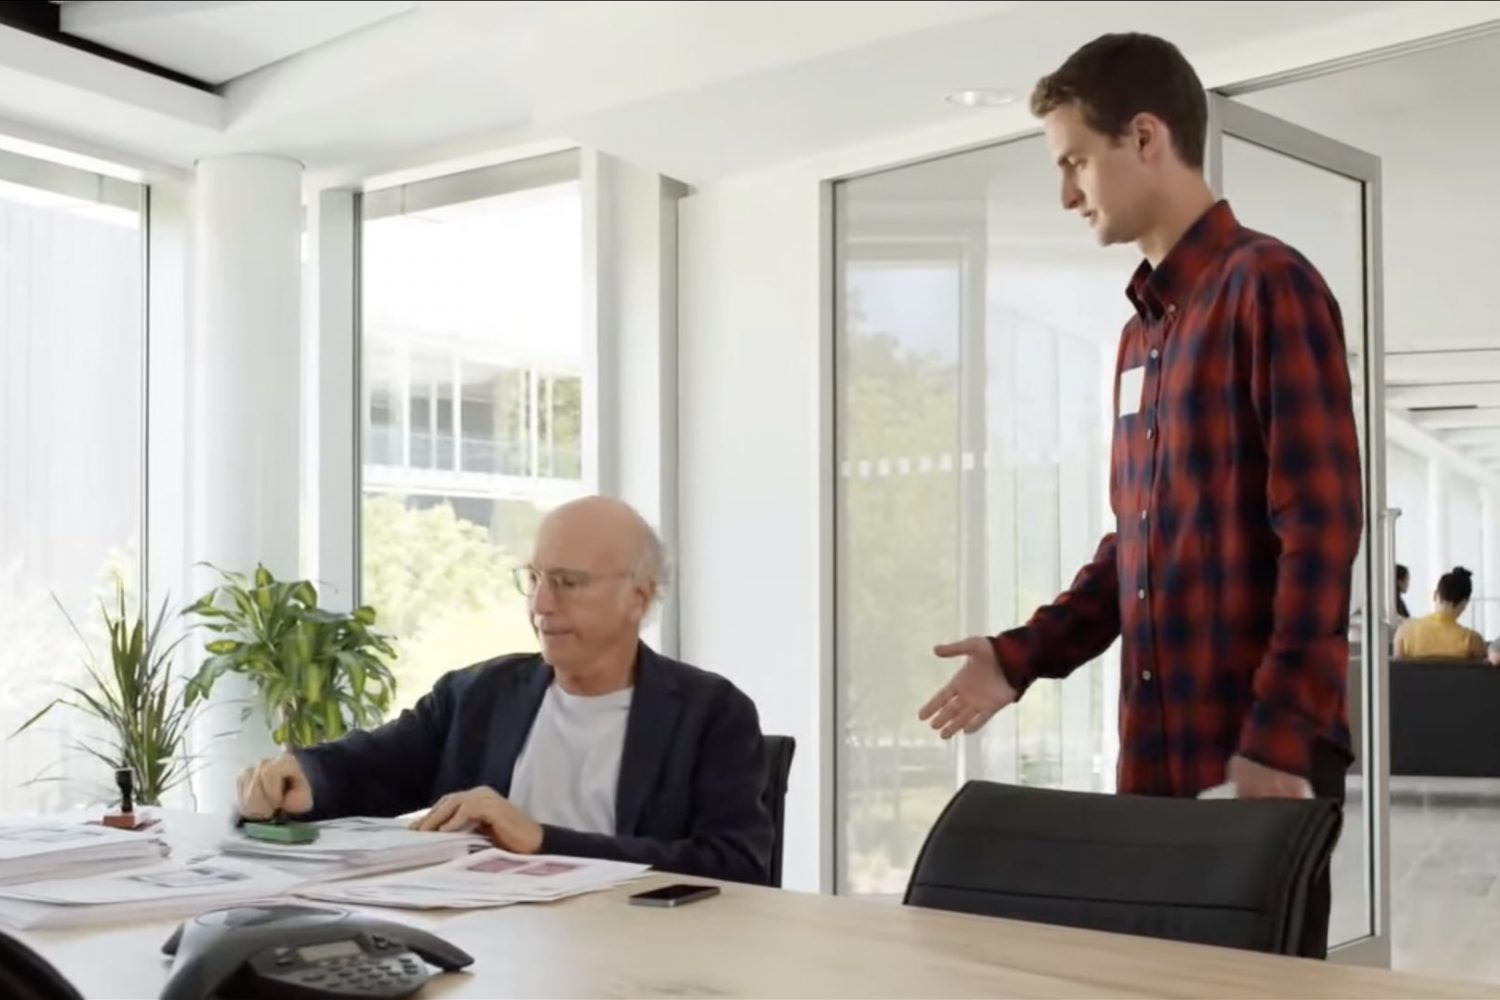 A still from Apple's unaired WWDC14 opening film showing Larry David as an app approval specialist and Snapchat founder Evan Spiegel